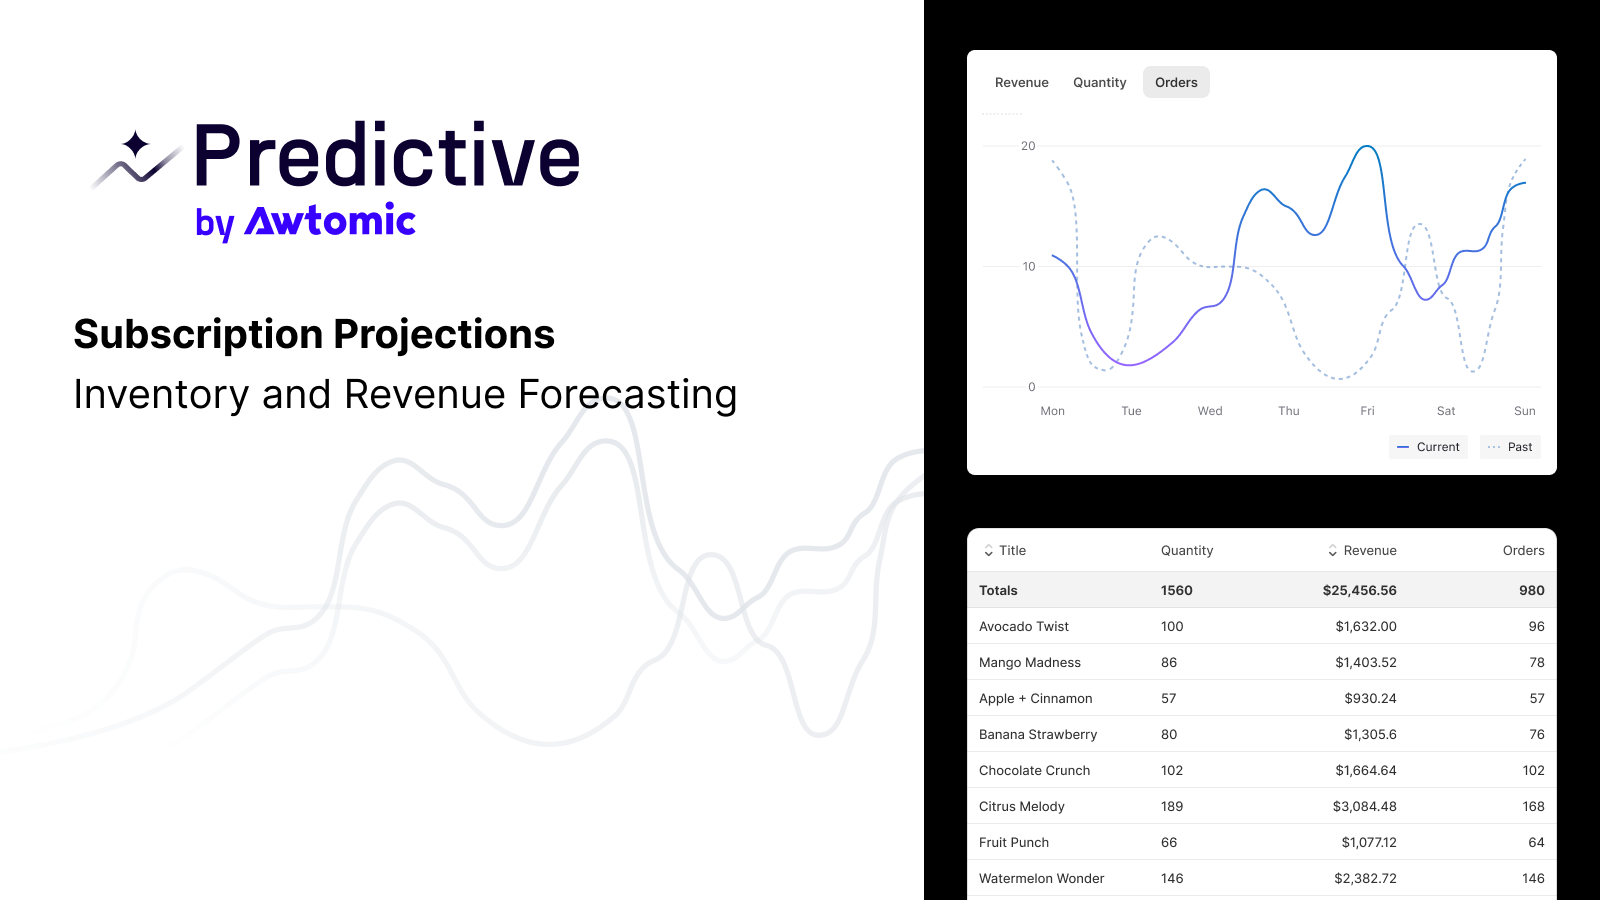 Predictive by Awtomic - Subscription Inventory and Revenue